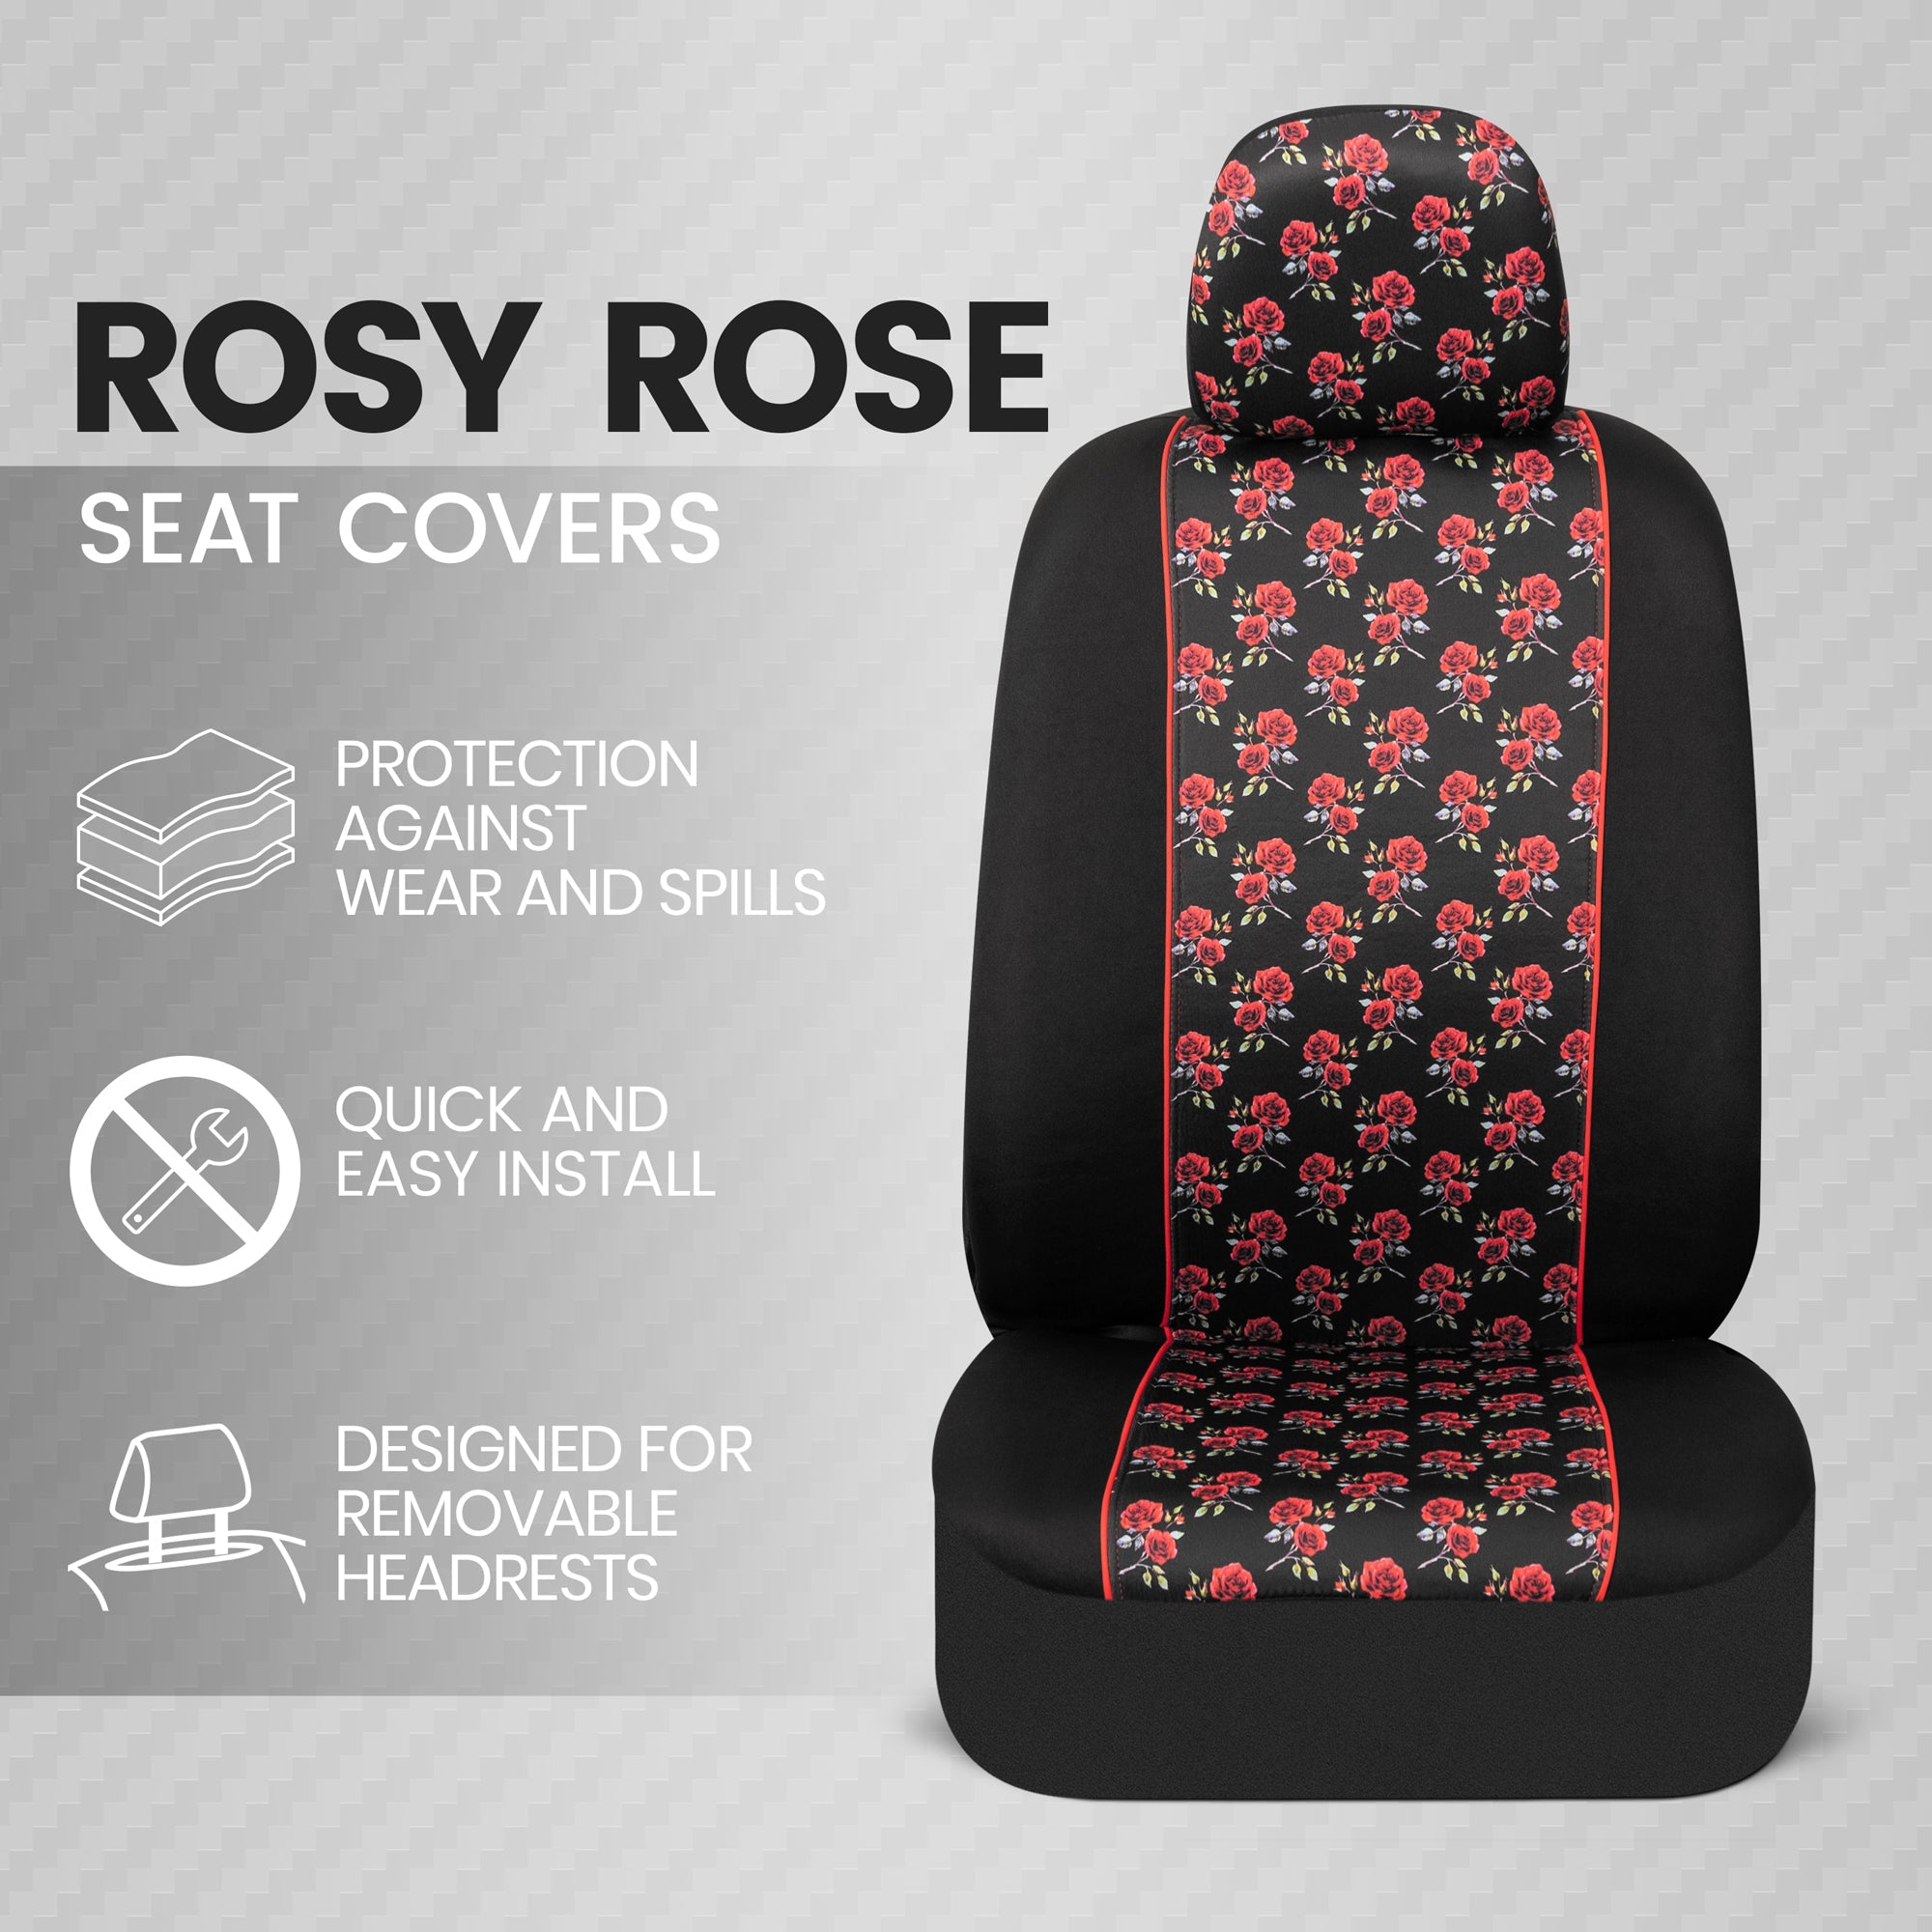 BDK Red Rose Car Seat Covers for Front Seats, 2 Pack – Flower Pattern Front Seat Cover Set with Matching Headrest, Sideless Design for Easy Installation, Fits Most Car Truck Van and SUV